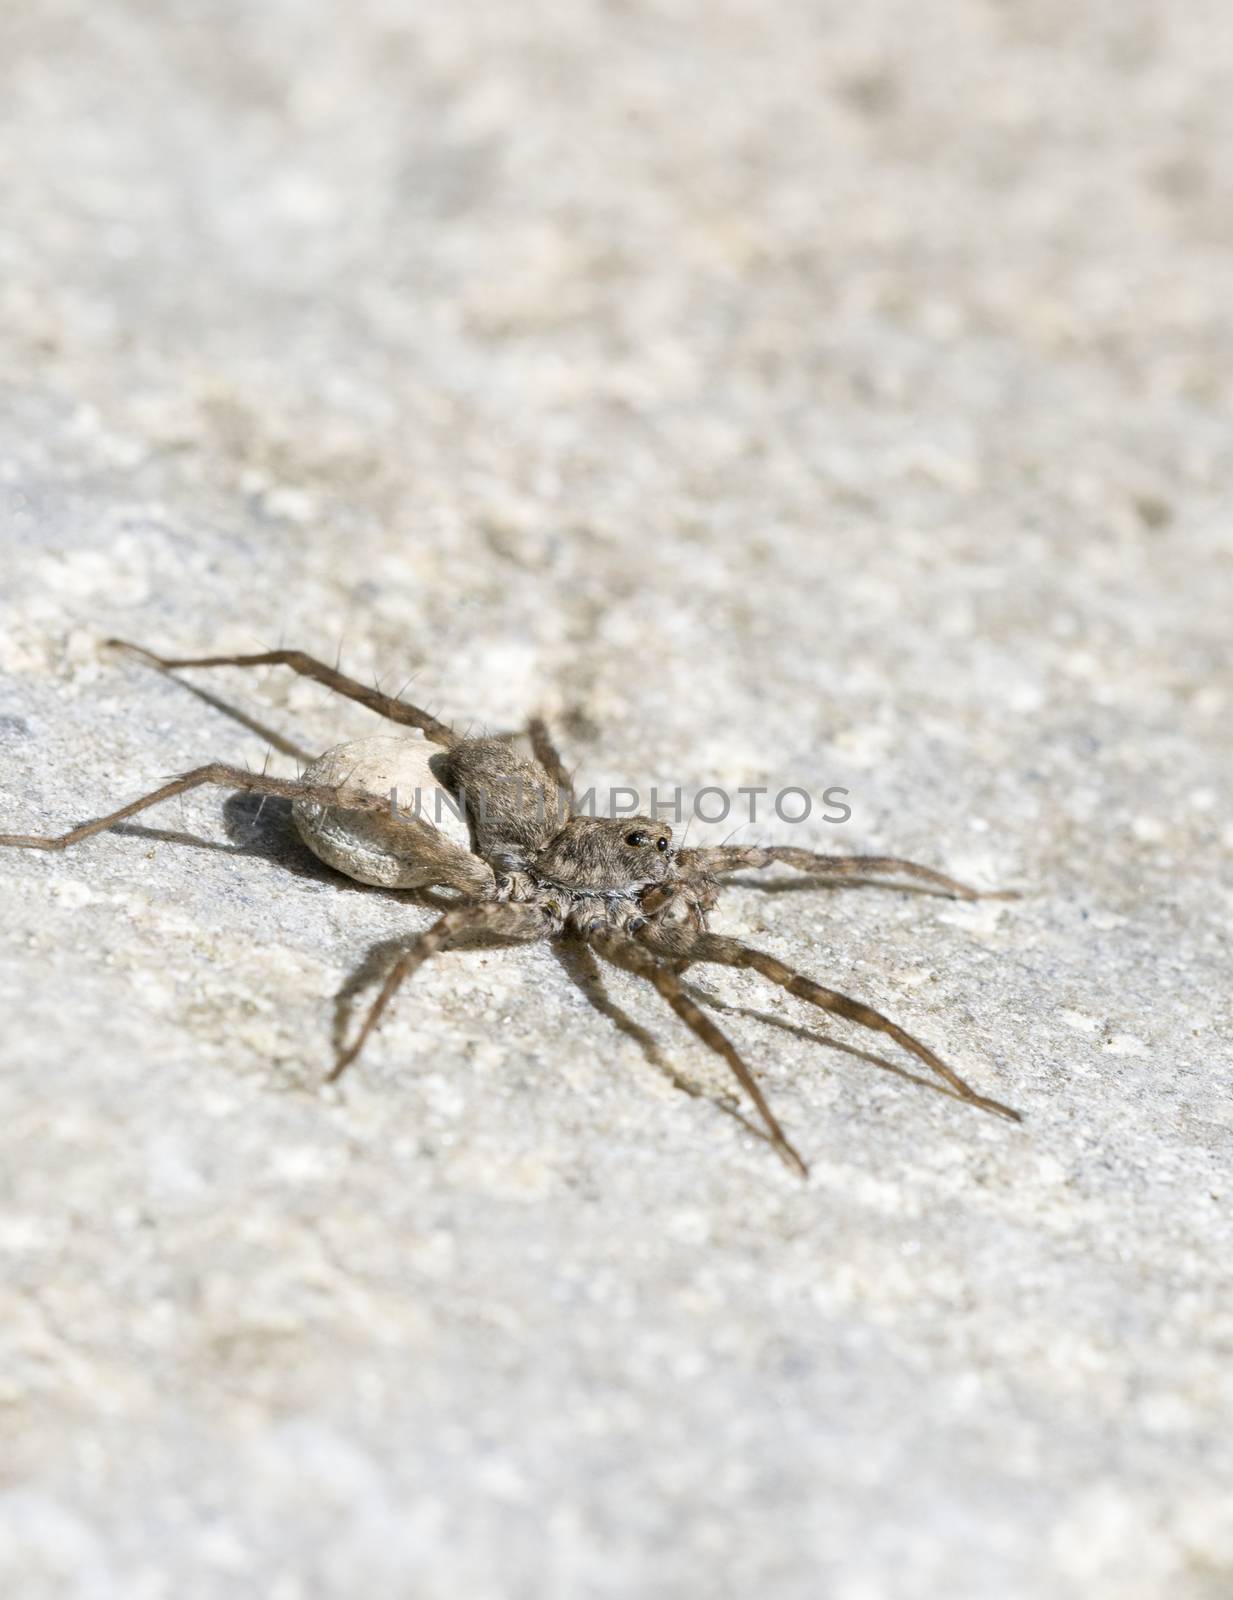 Female Wolf Spider with egg sac by Njean